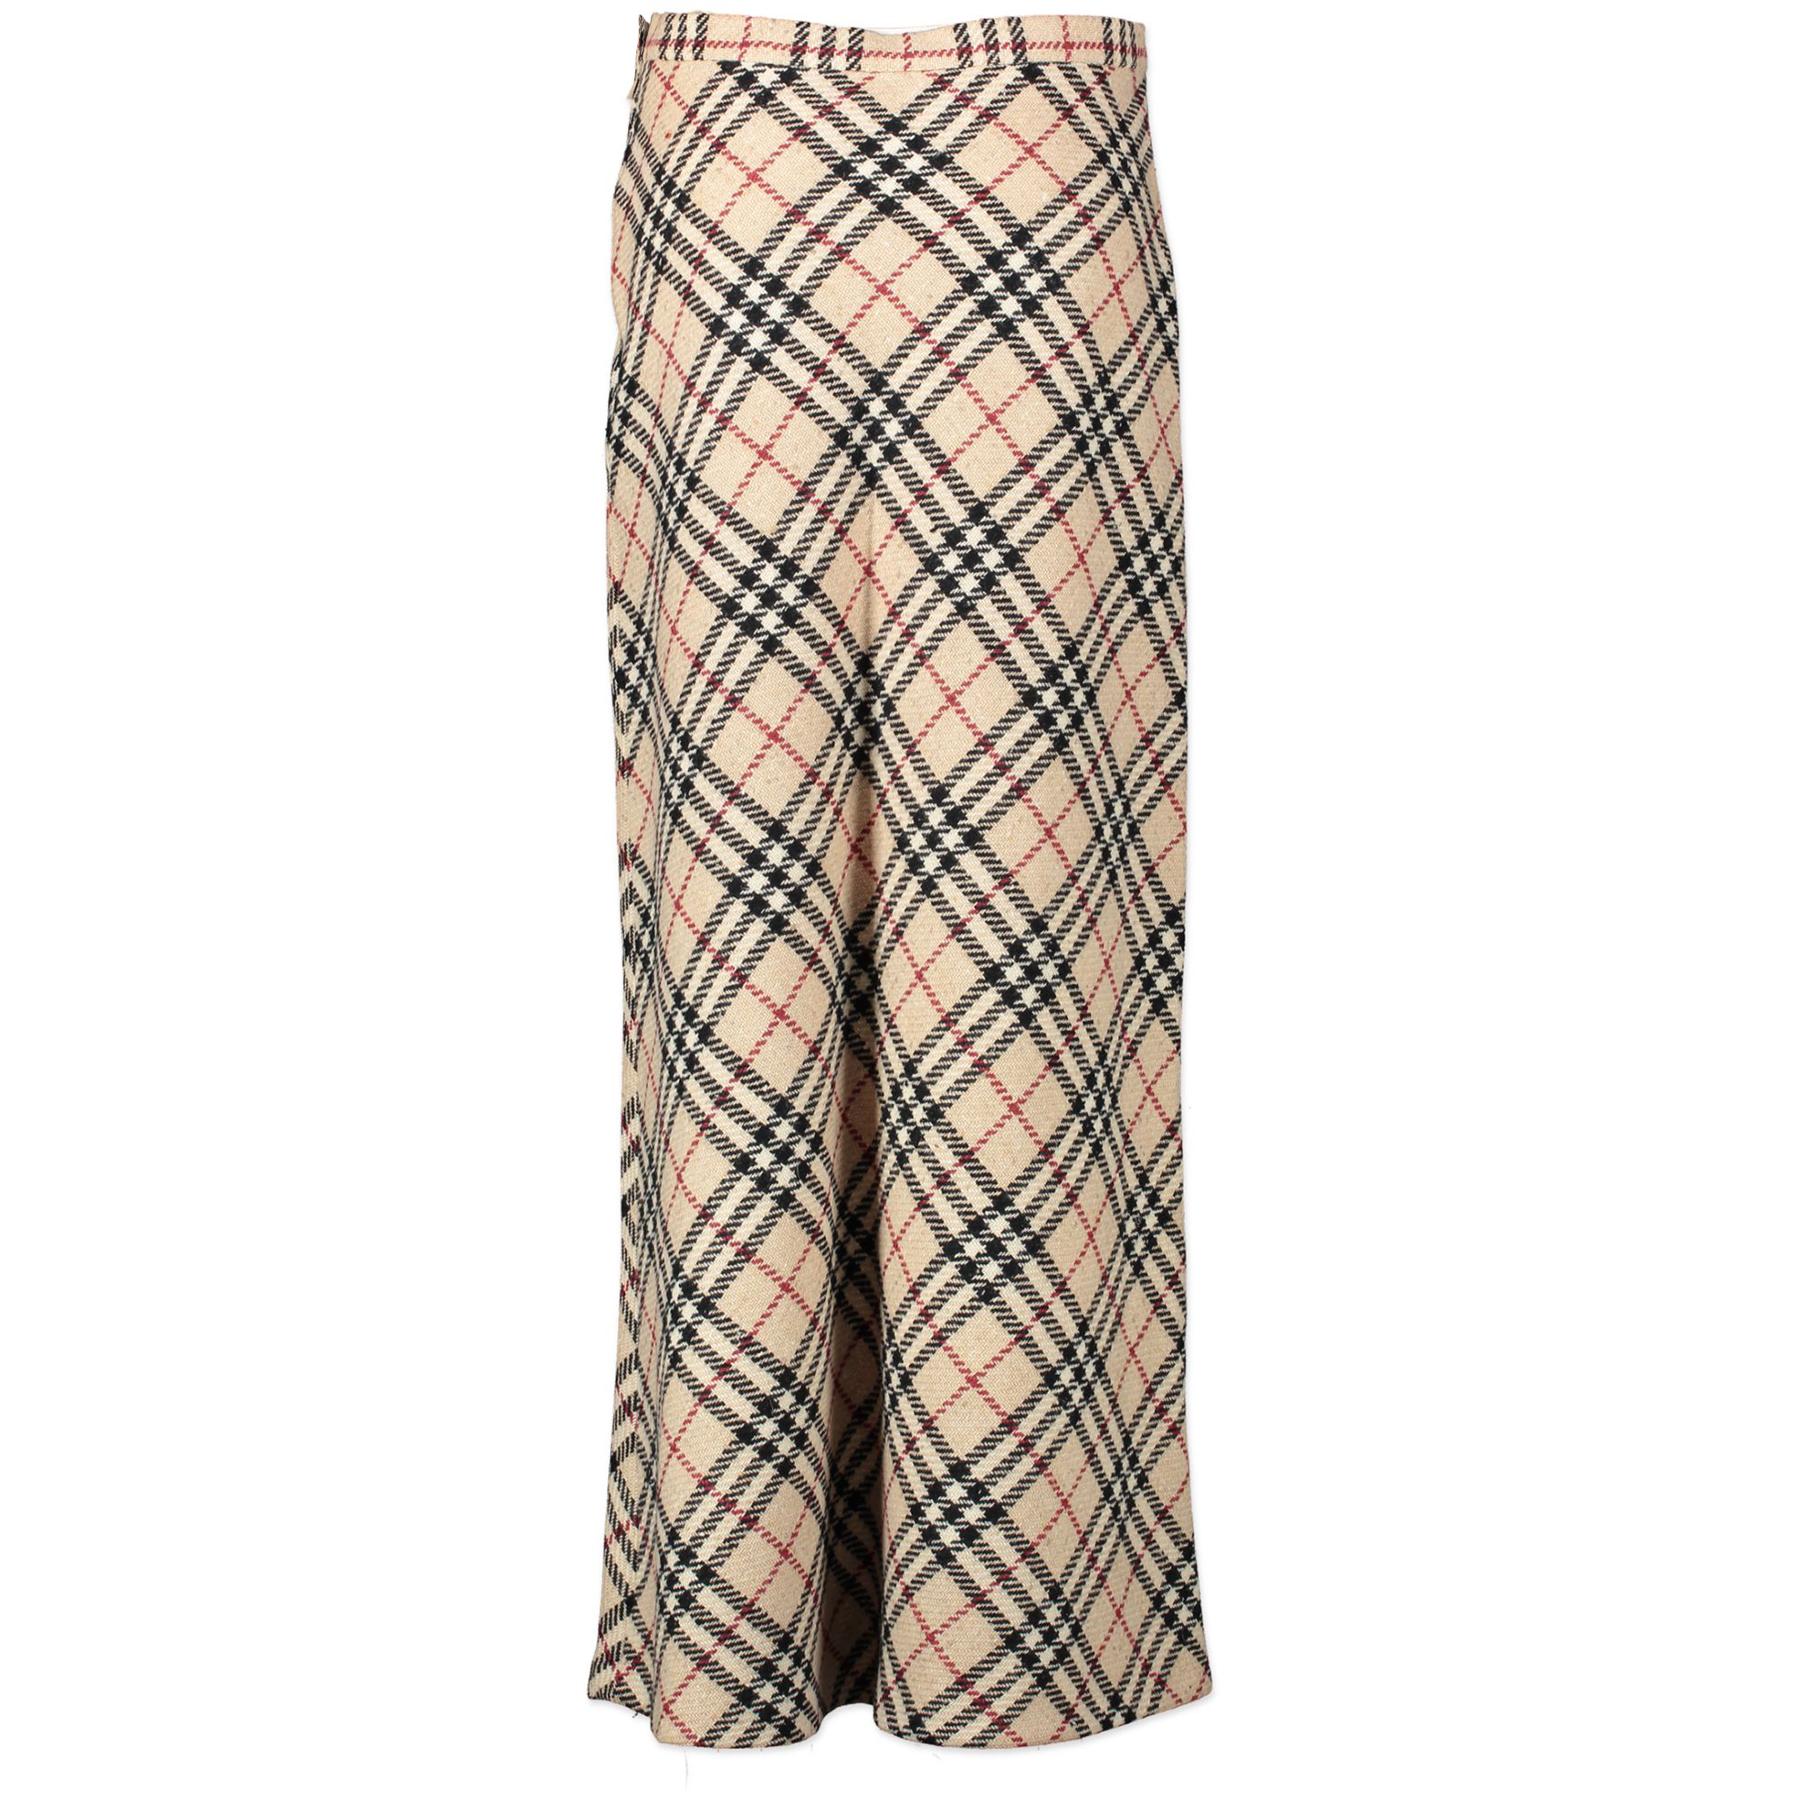 Get yourself this long, elegant skirt by Burberry. It's crafted out of 100% whool and features a plaid patern. Go out and about in style with this timeless skirt!